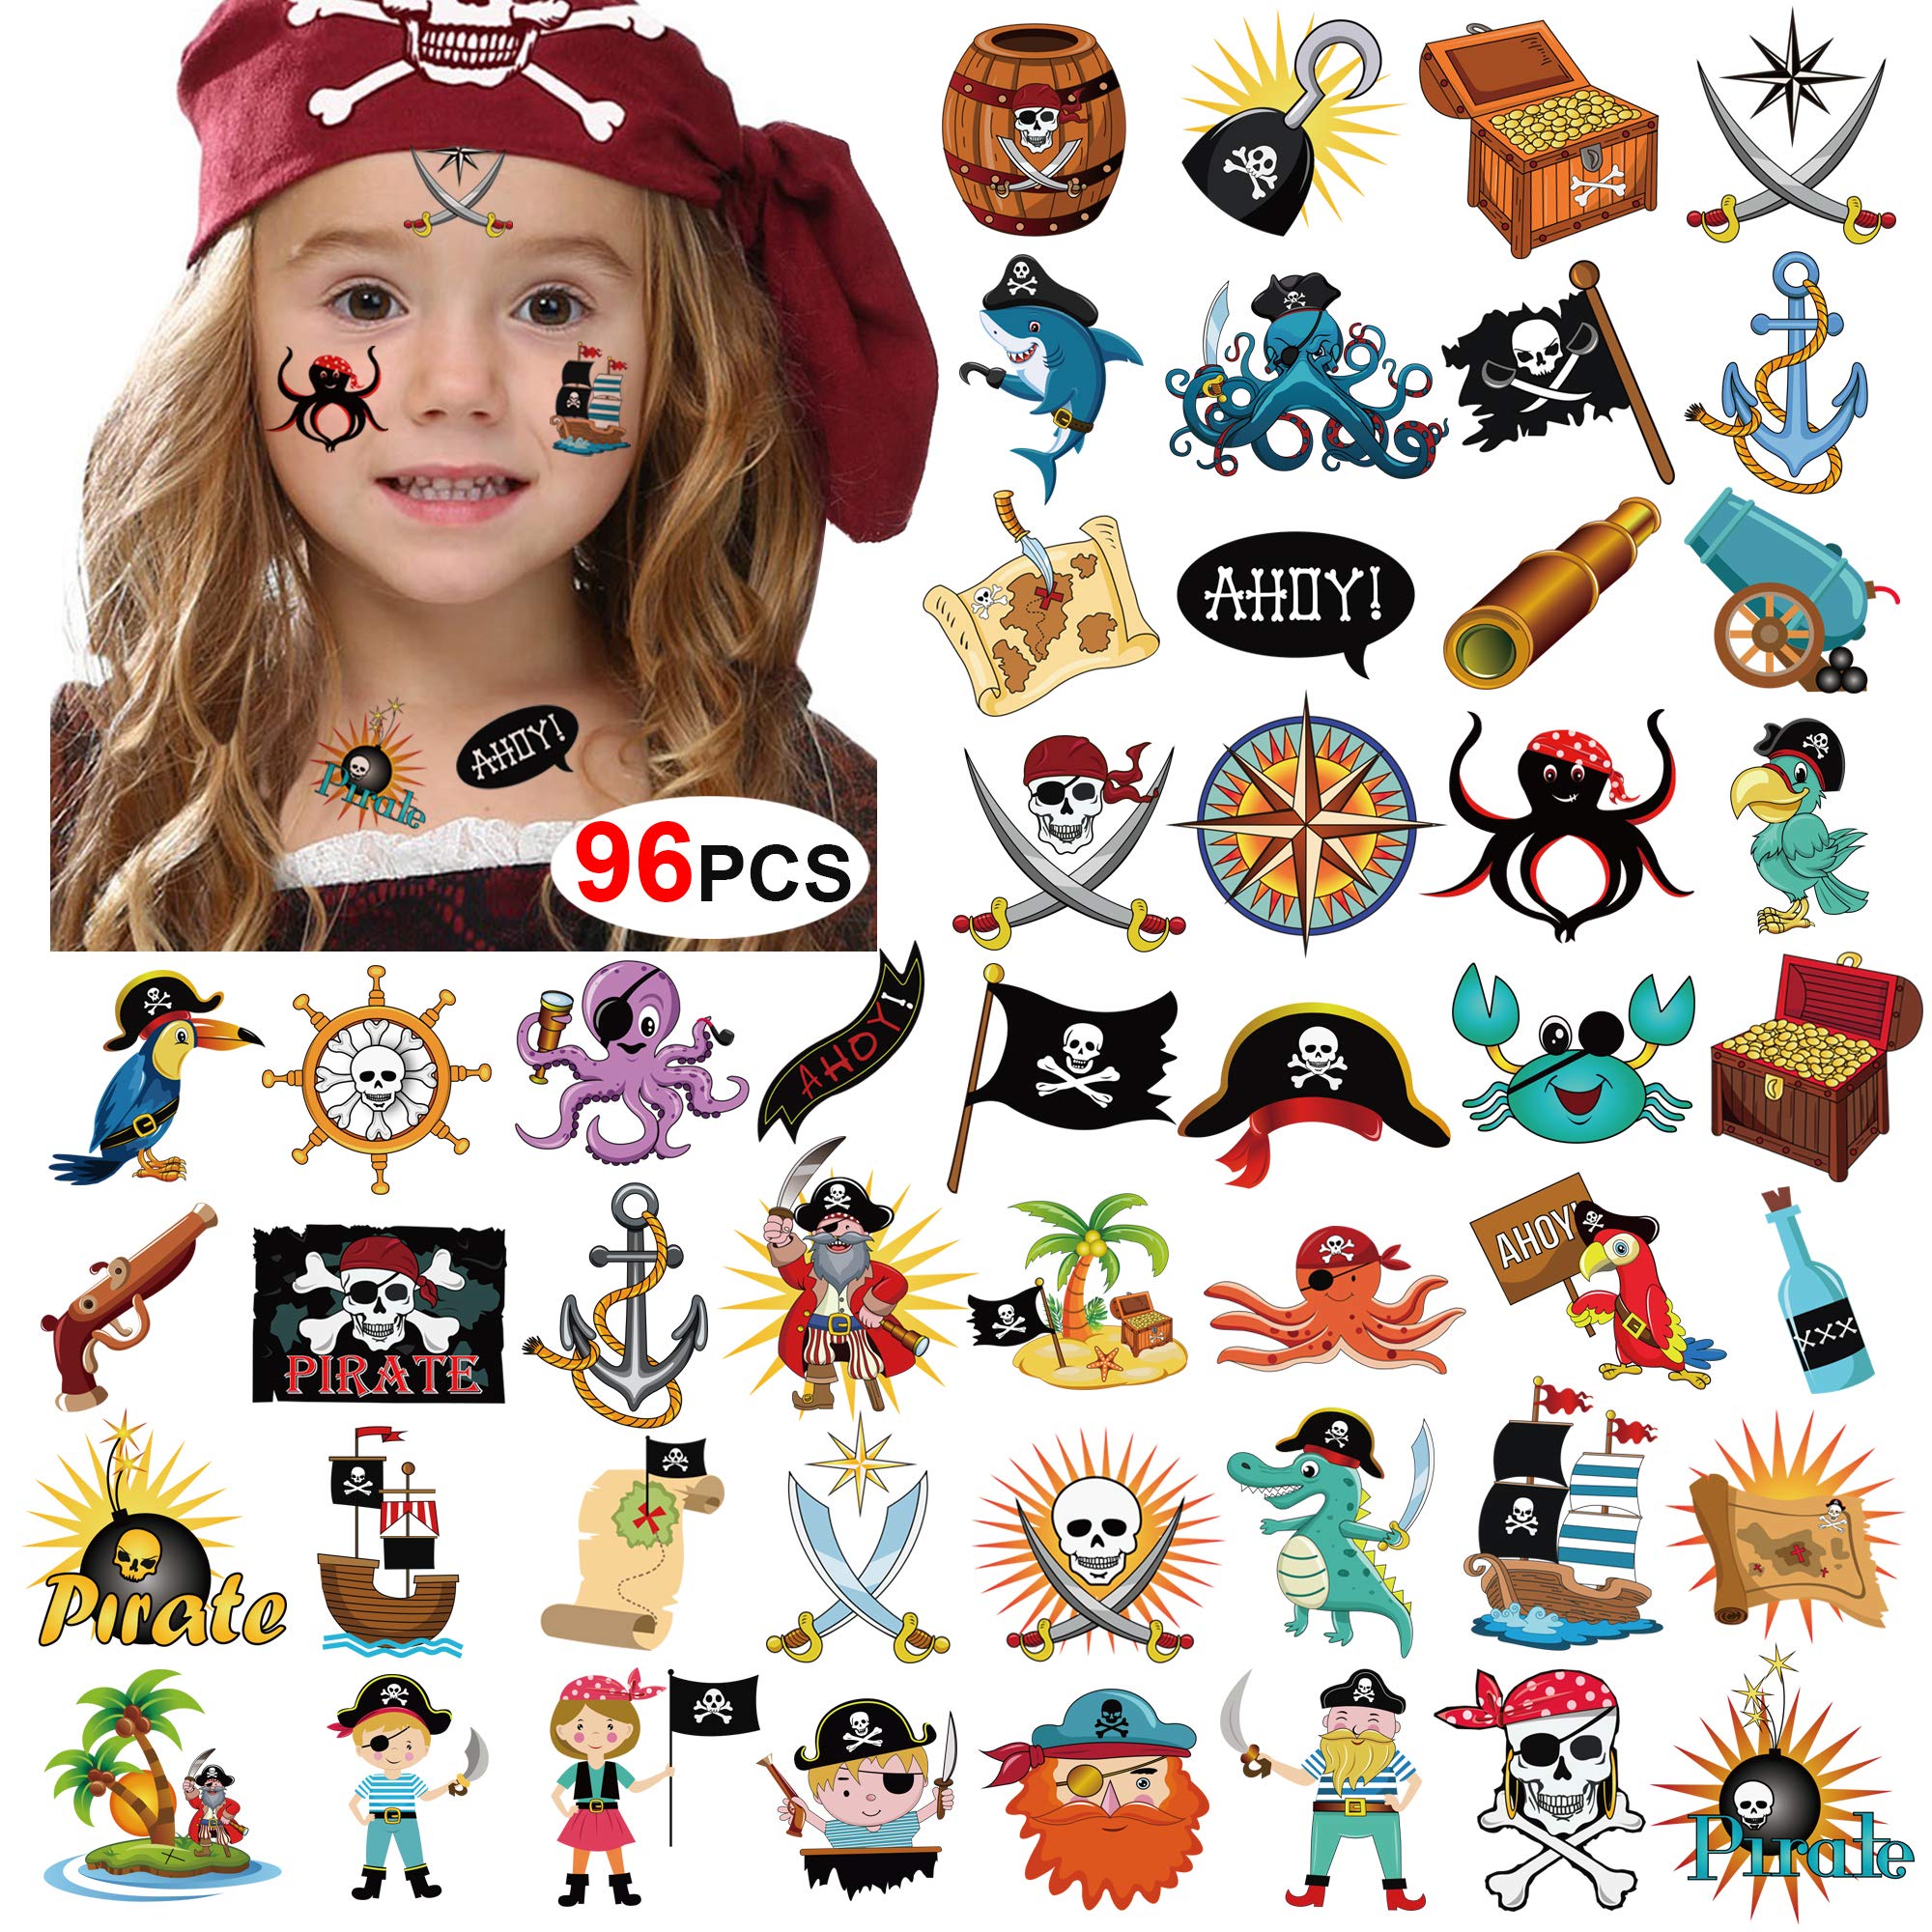 Pirate Tattoos(96Pcs), Konsait Pirate Temporary Tattoo Fake Neverland Pirated Cannon Powder Jake Captain Tattoo Body Sticker for Pirate Birthday Party Favors Supplies Kids Boys Girls Party Bag Filler